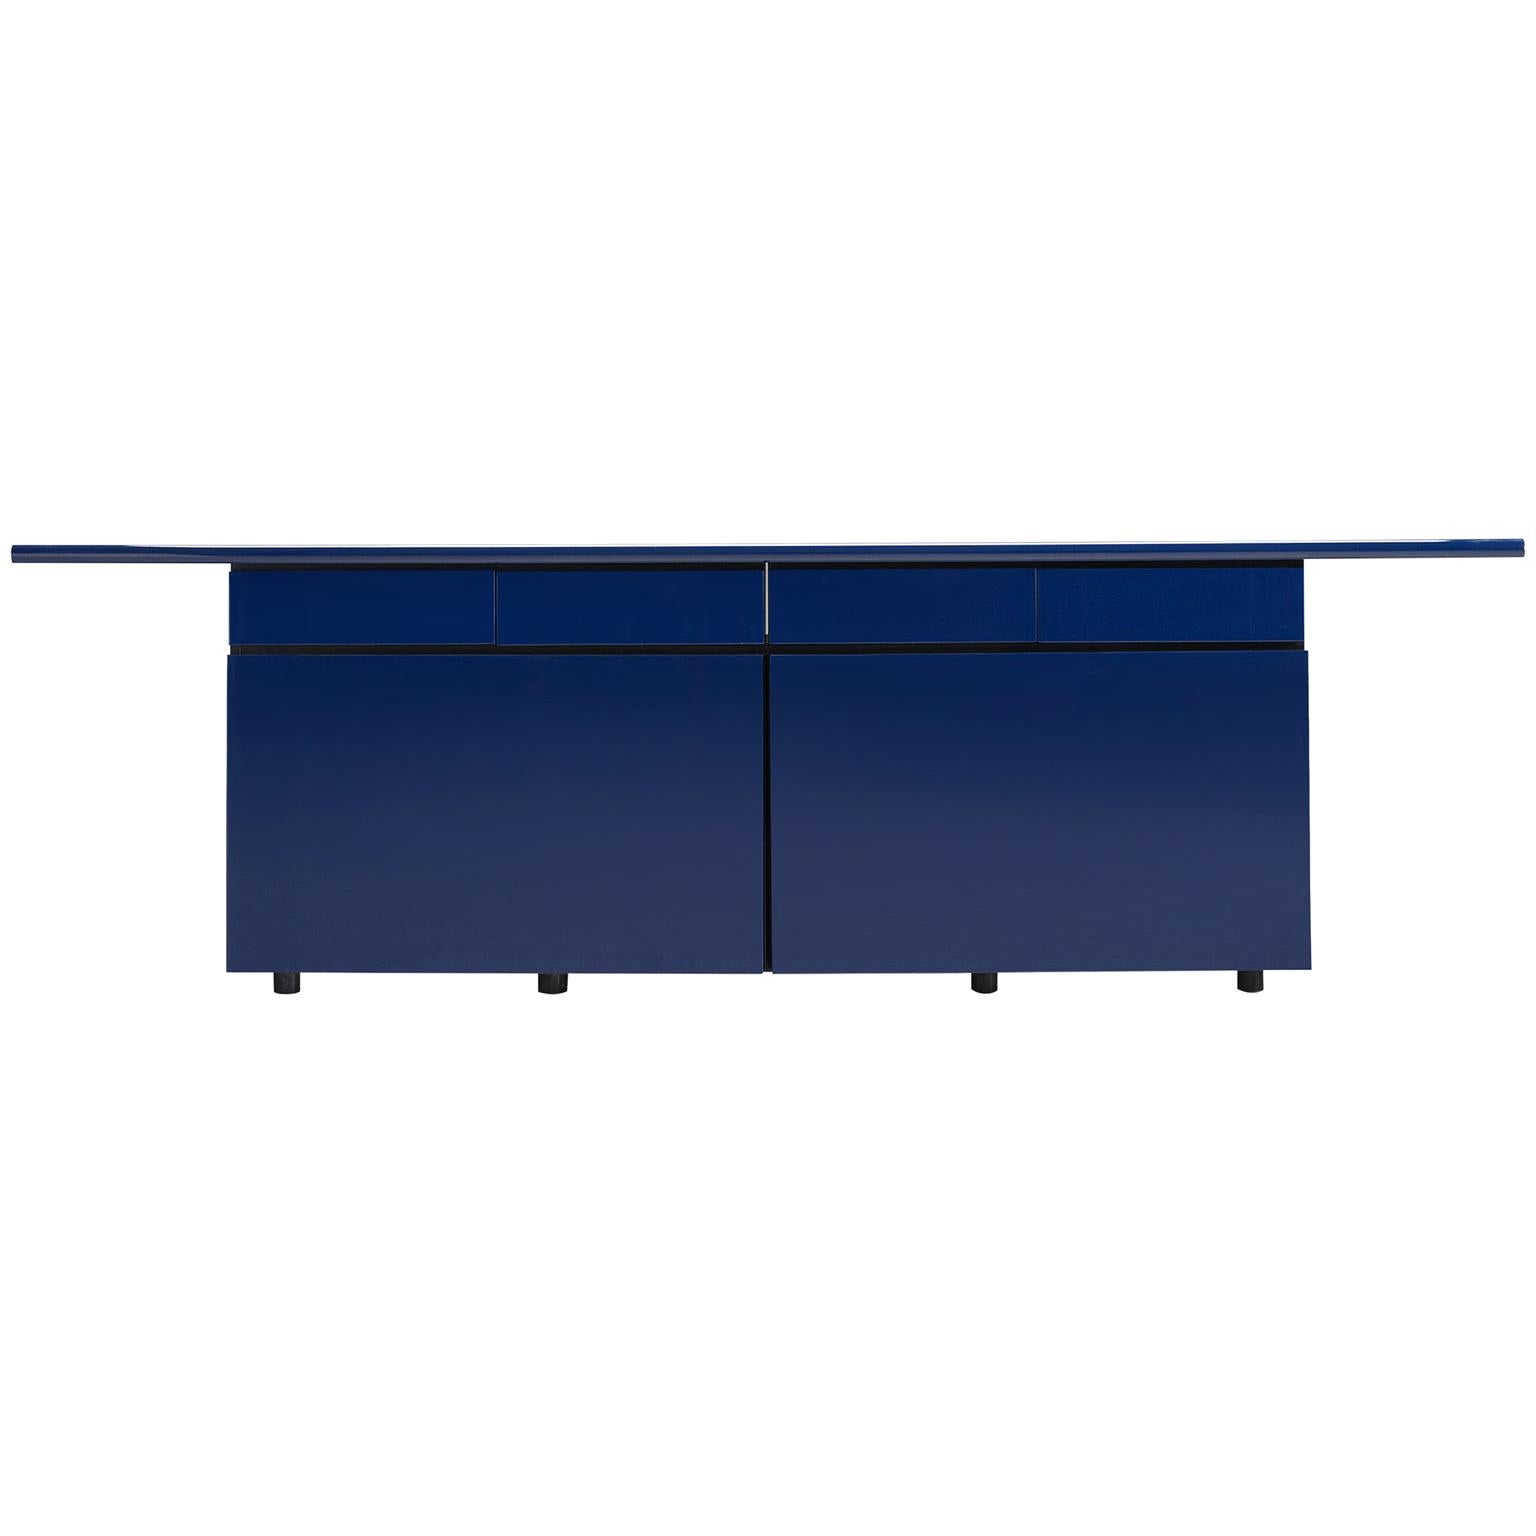 Giotto Stoppino for Acerbis, 'Sheraton' sideboard, blue wood, veneer, Italy, 1979.

This sturdy credenza with sliding doors is designed by Giotto Stoppino for Acerbis and executed in laminated wood. The eight little square legs make sure that the